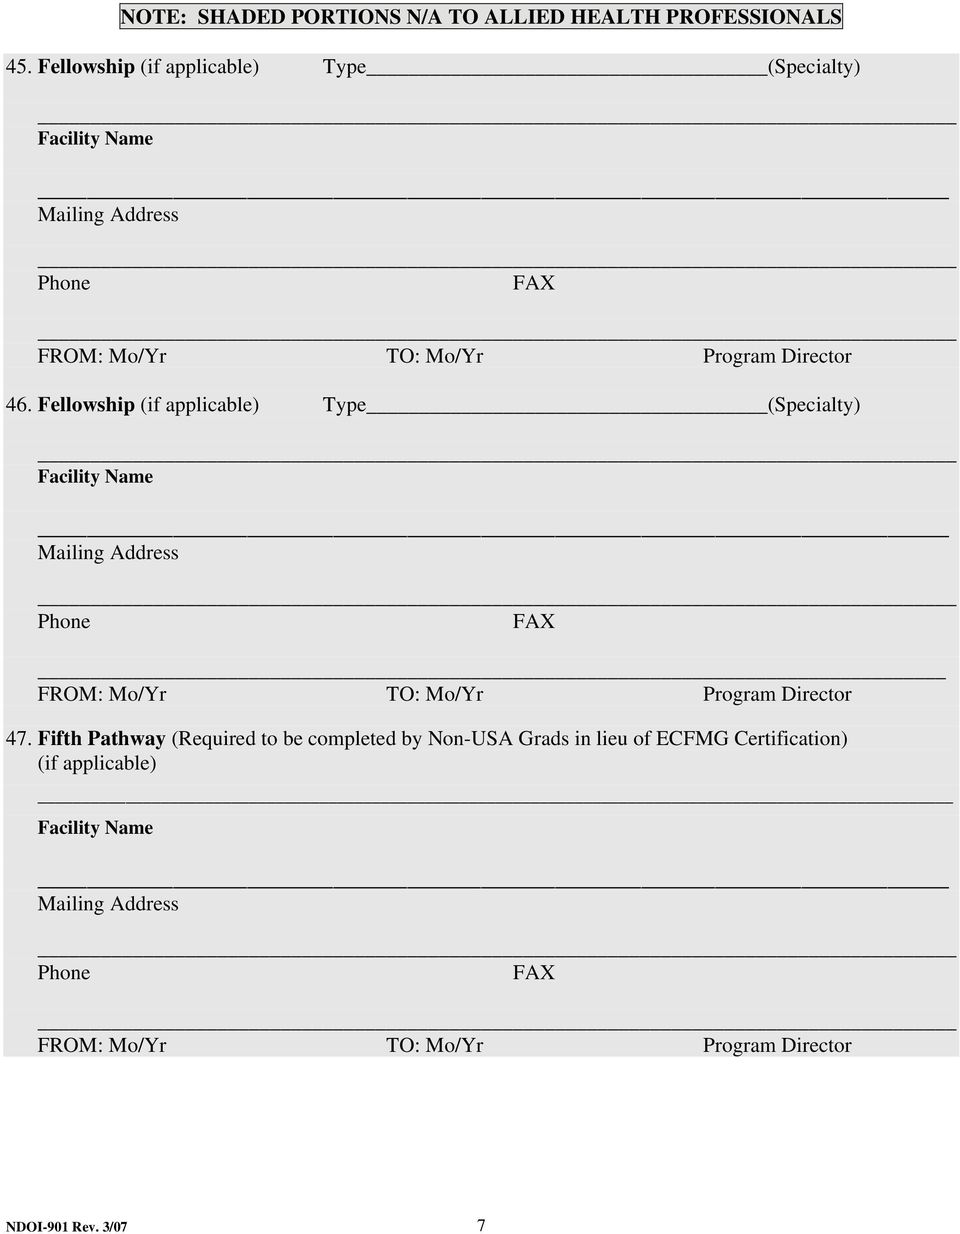 Fellowship (if applicable) Type (Specialty) _ Facility Name Phone FAX FROM: Mo/Yr TO: Mo/Yr Program Director 47.